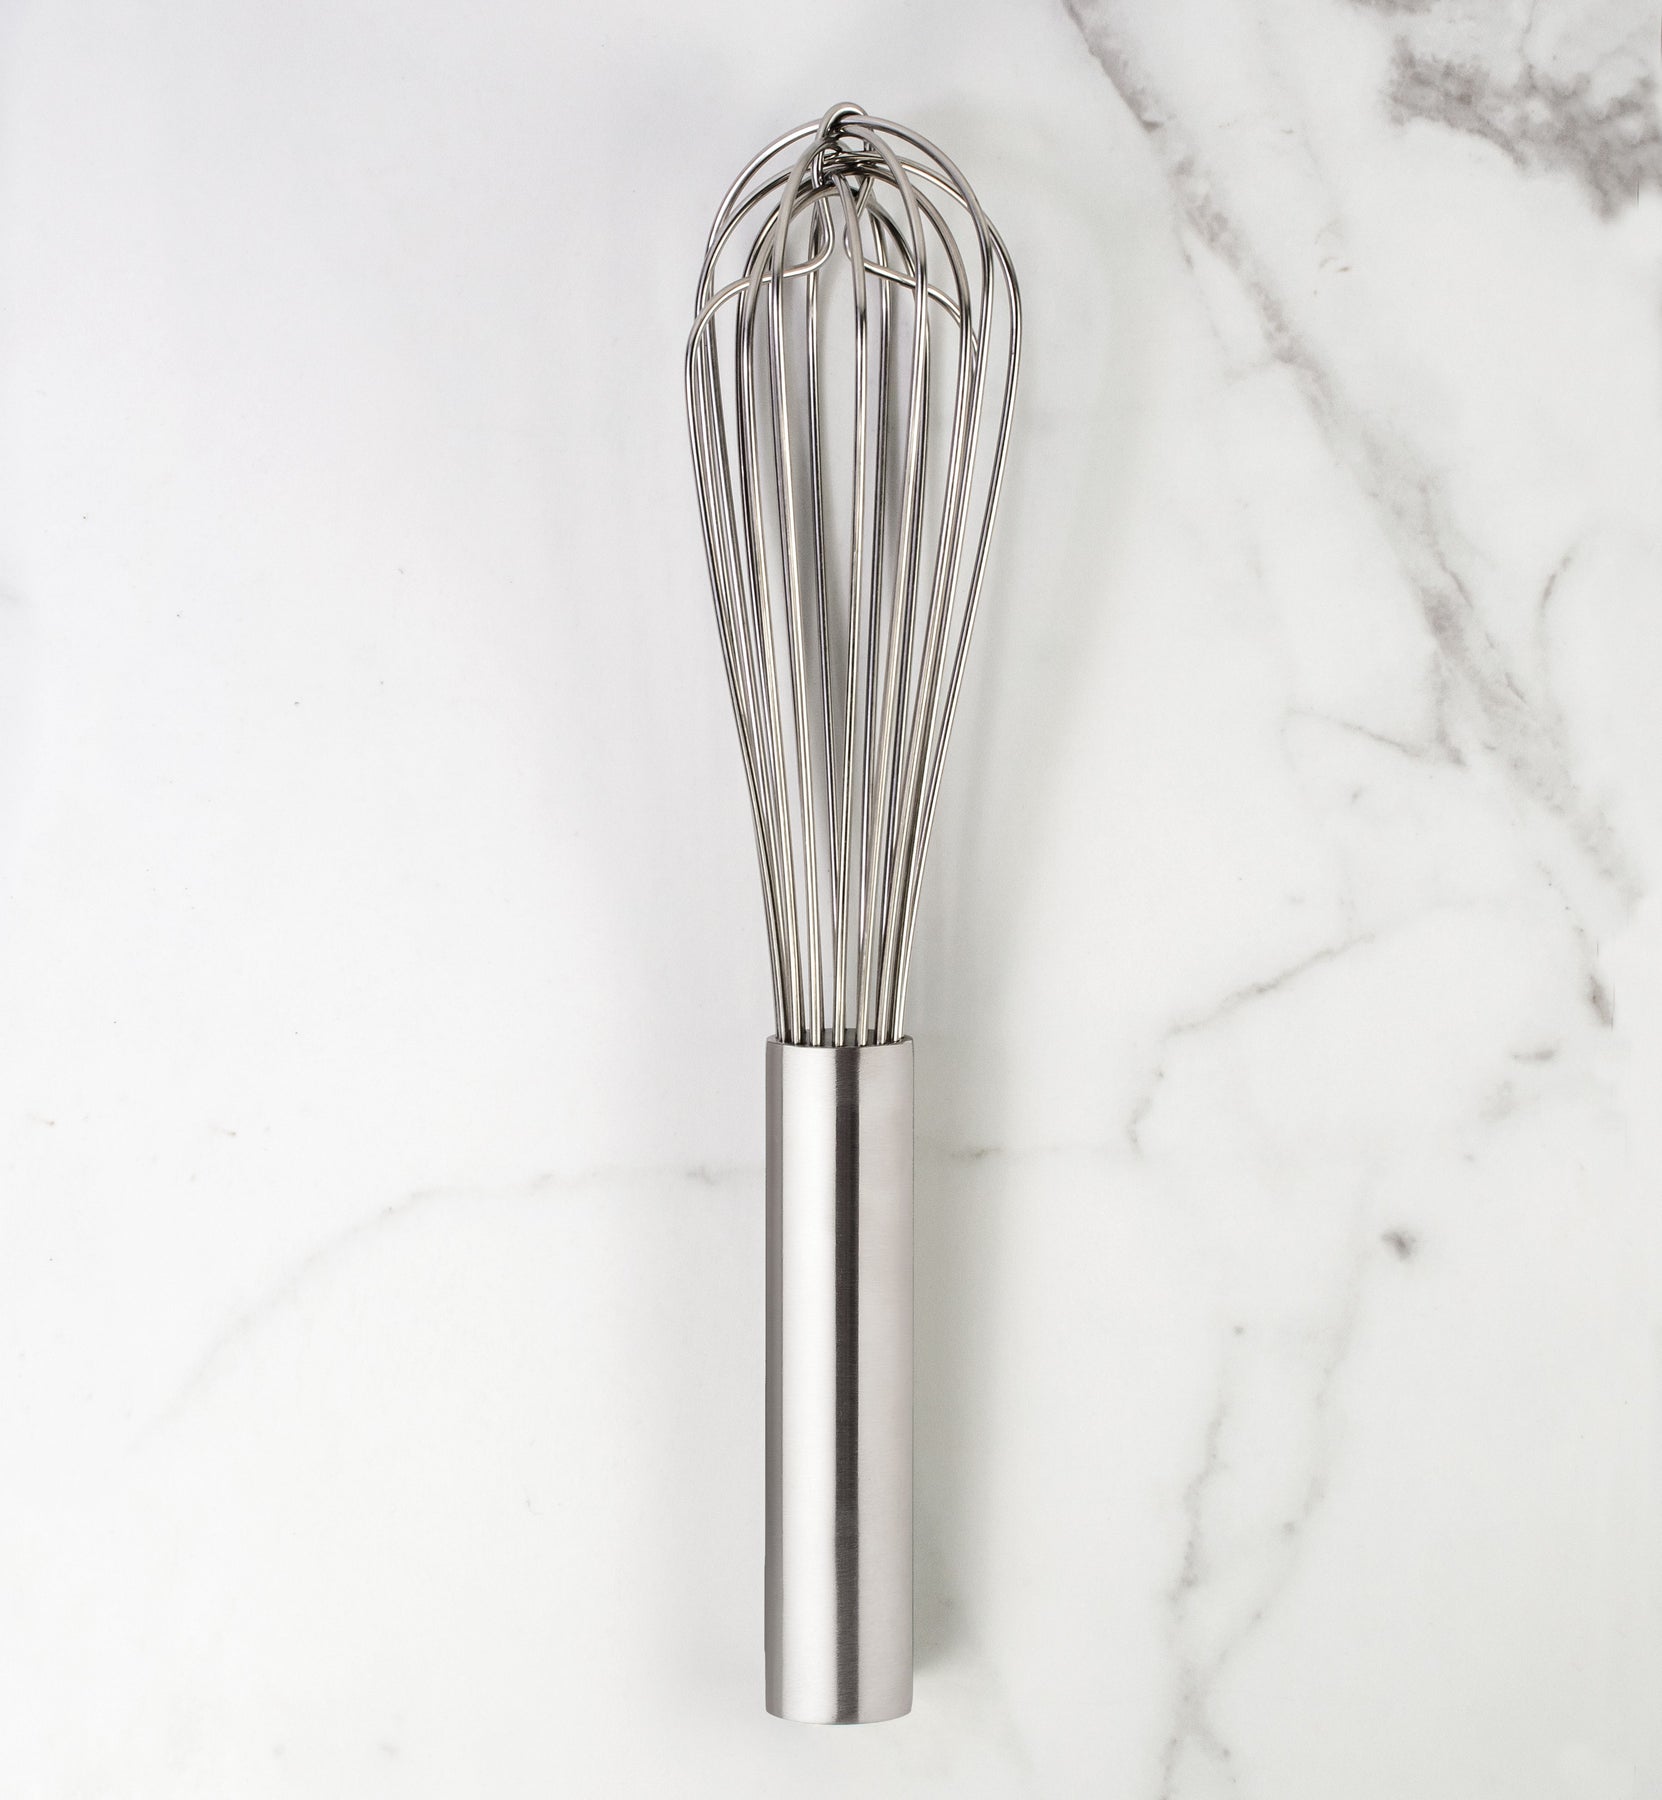 https://artisincakes.com/cdn/shop/products/whisk-french-whip-12-inches-by-mrs-andersons-bakingkitchen-toolshic-harold-importsart-is-in-cakes-bakery-supplydefault-title-349590_1800x1800.jpg?v=1603155105